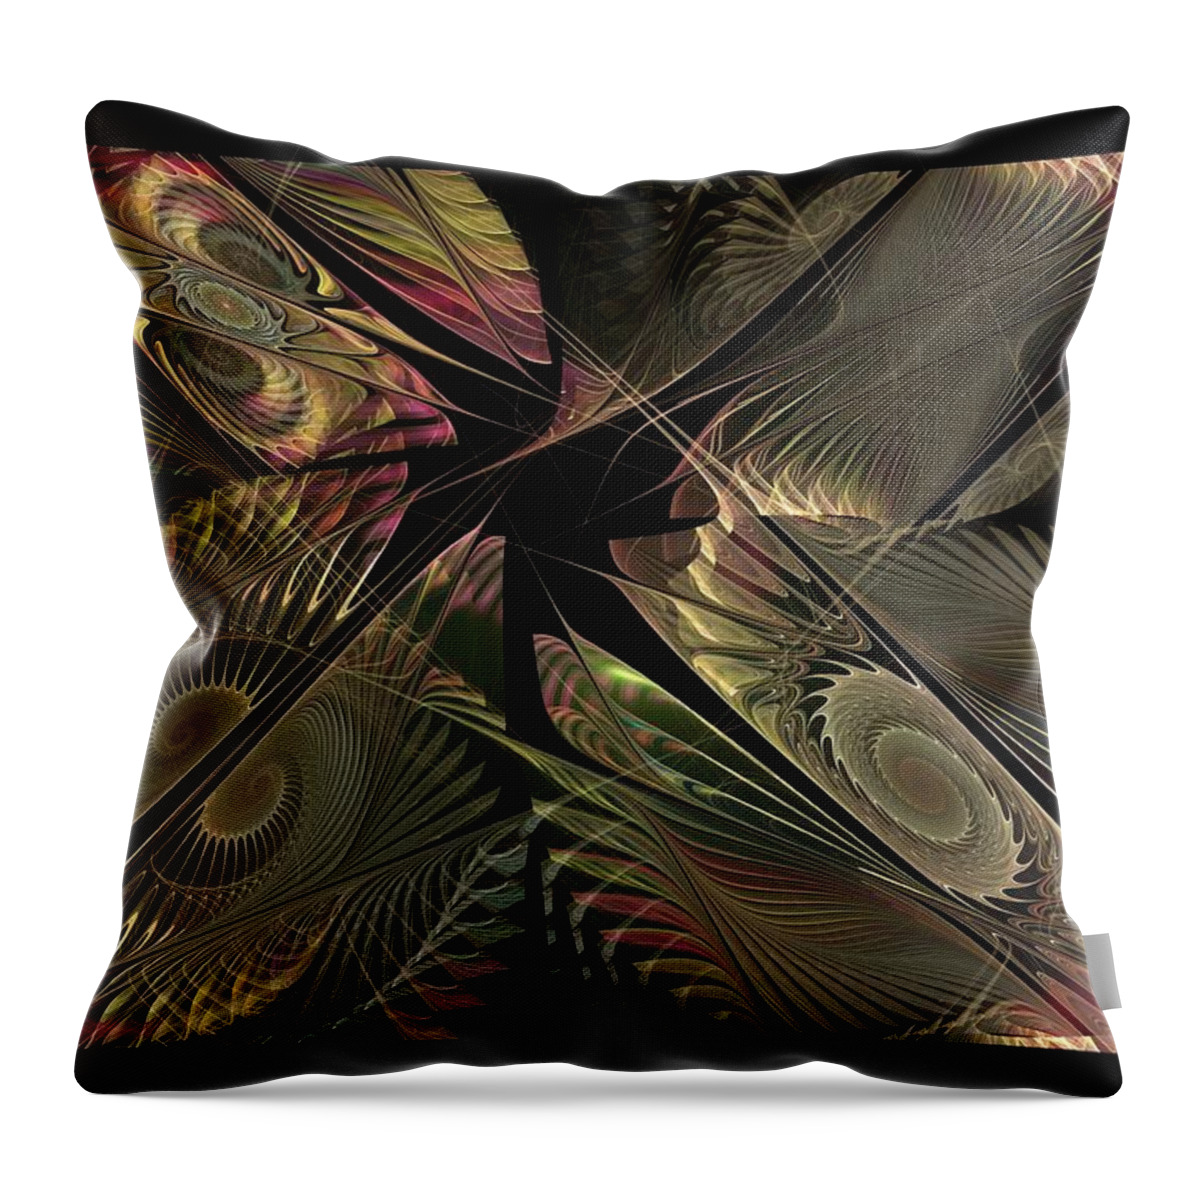 Abstract Throw Pillow featuring the digital art The Elementals - Calling The Corners by Nirvana Blues